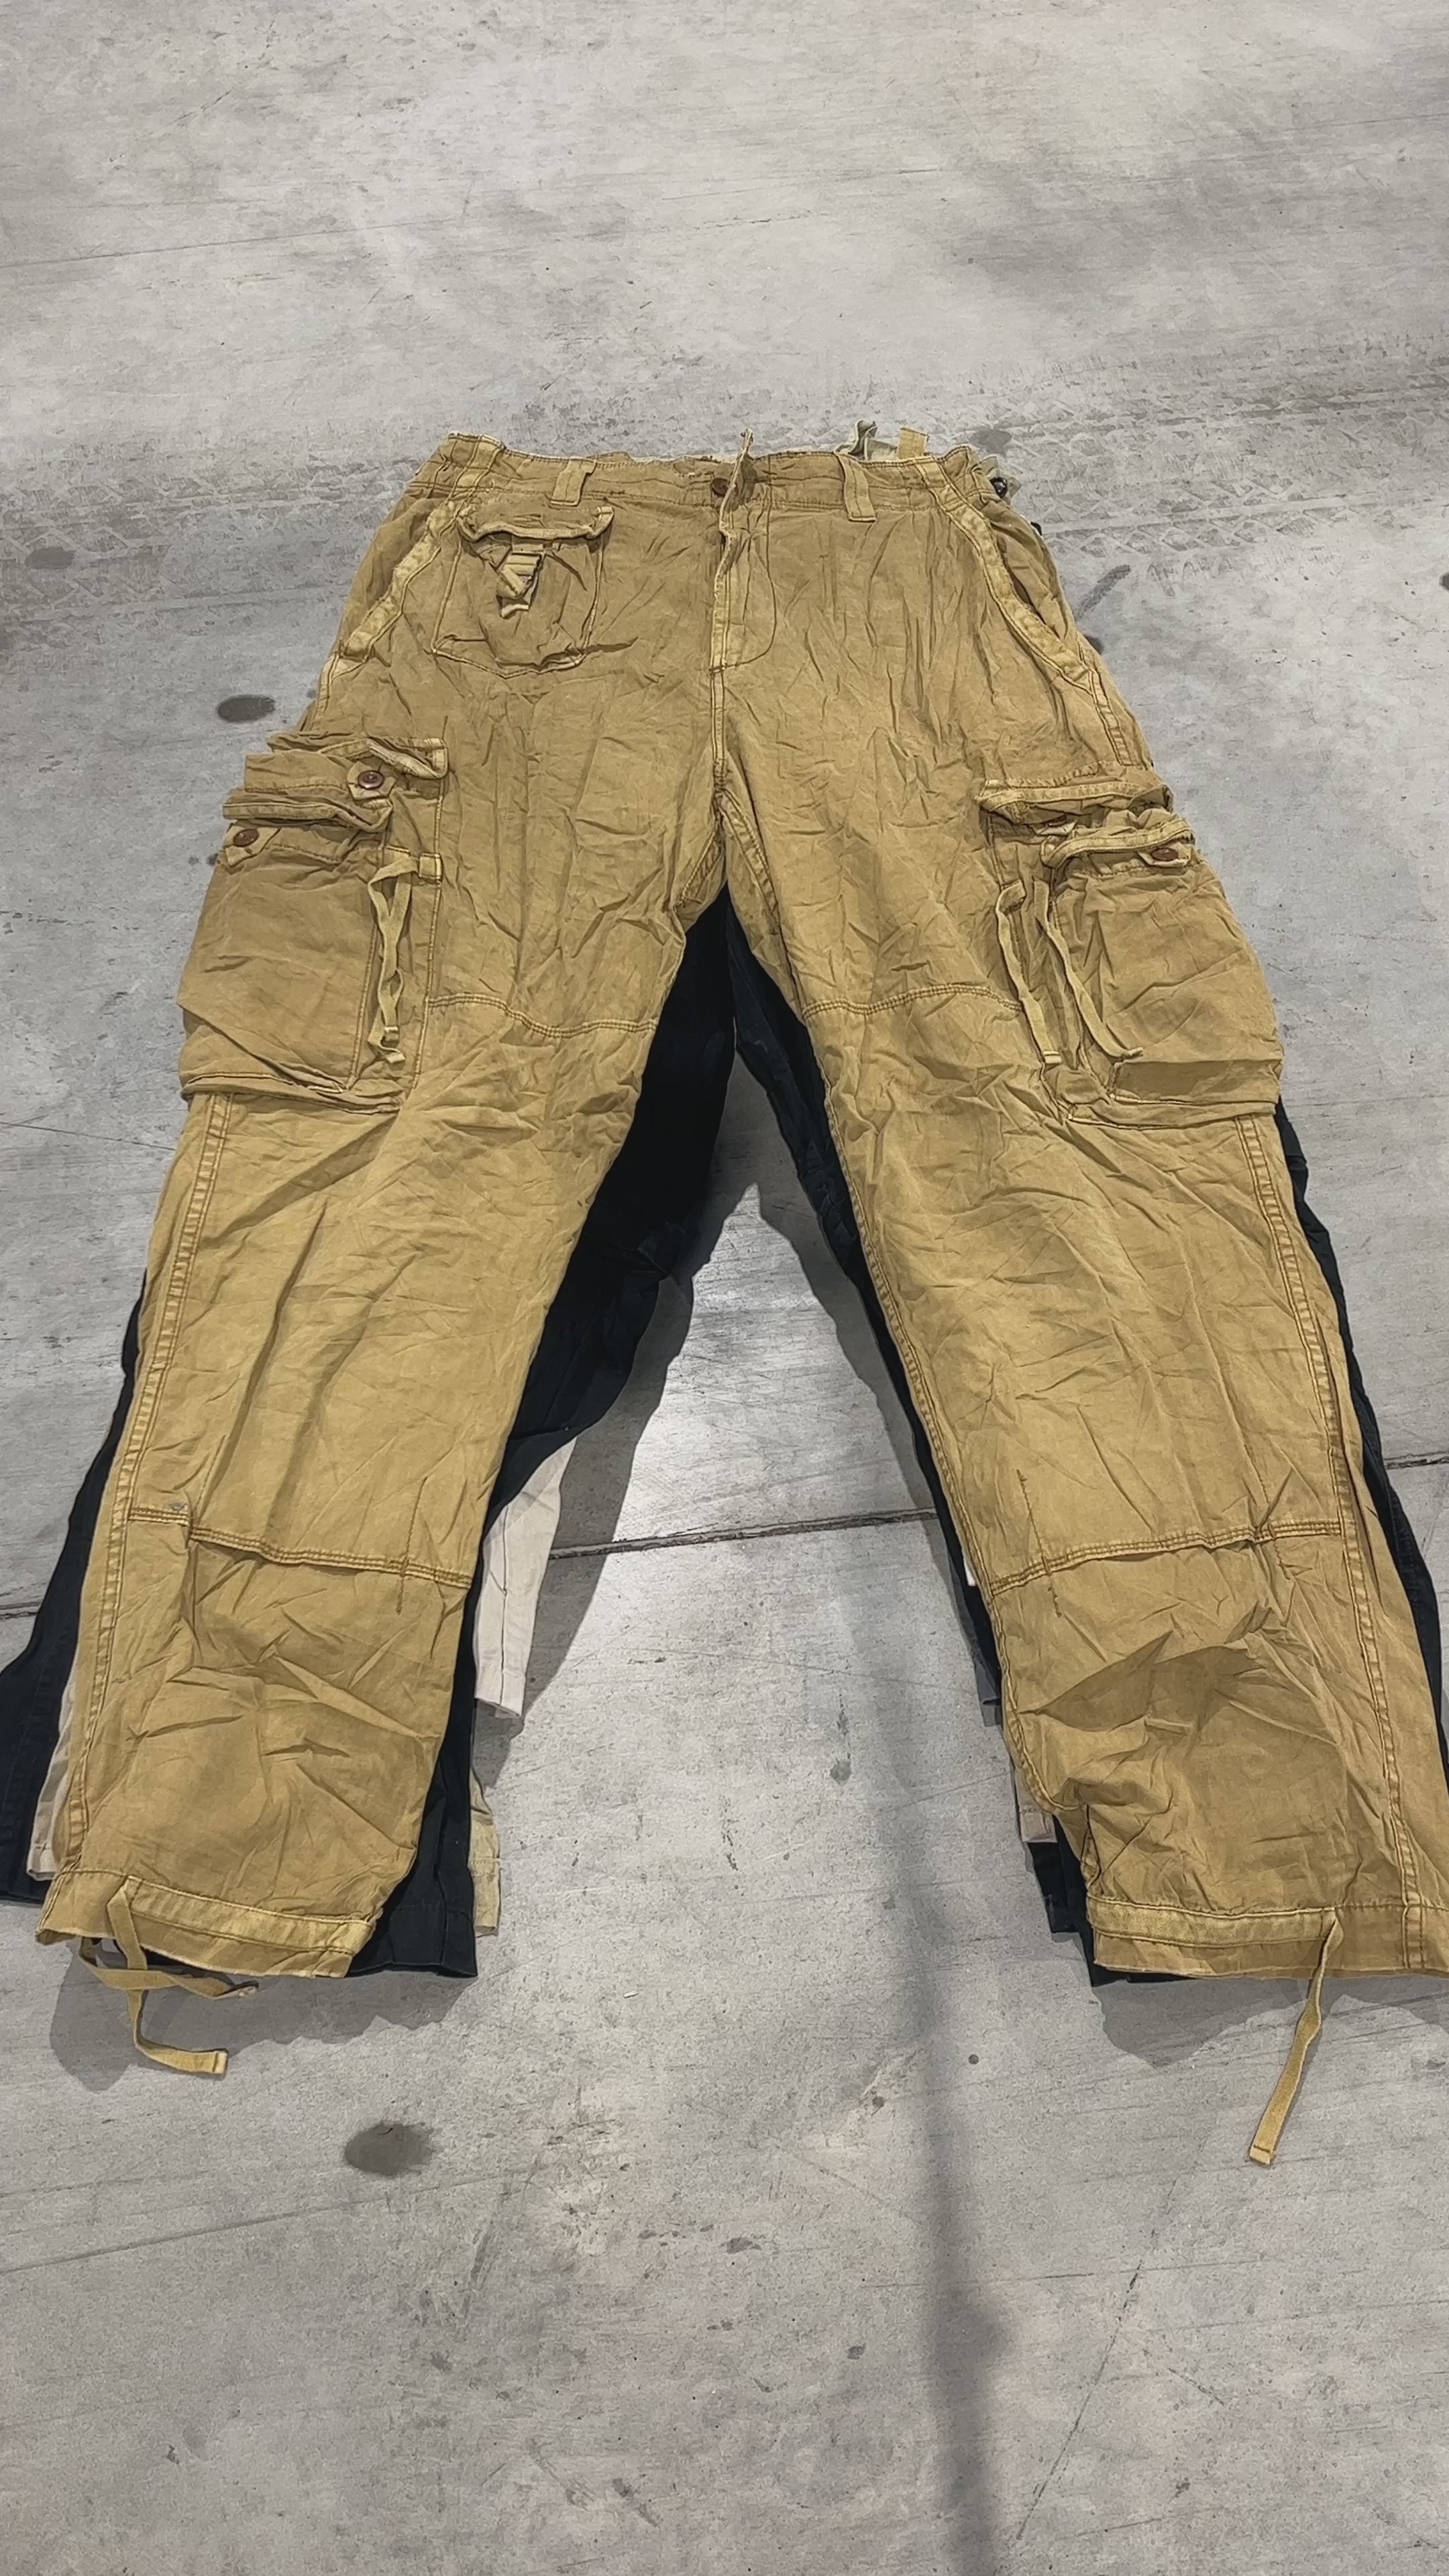 Olive Green Cargo Pants - United by Arrows (Japan Exclusive Streetwear Brand)  | Olive green cargo pants, Green cargo pants, Cargo pants